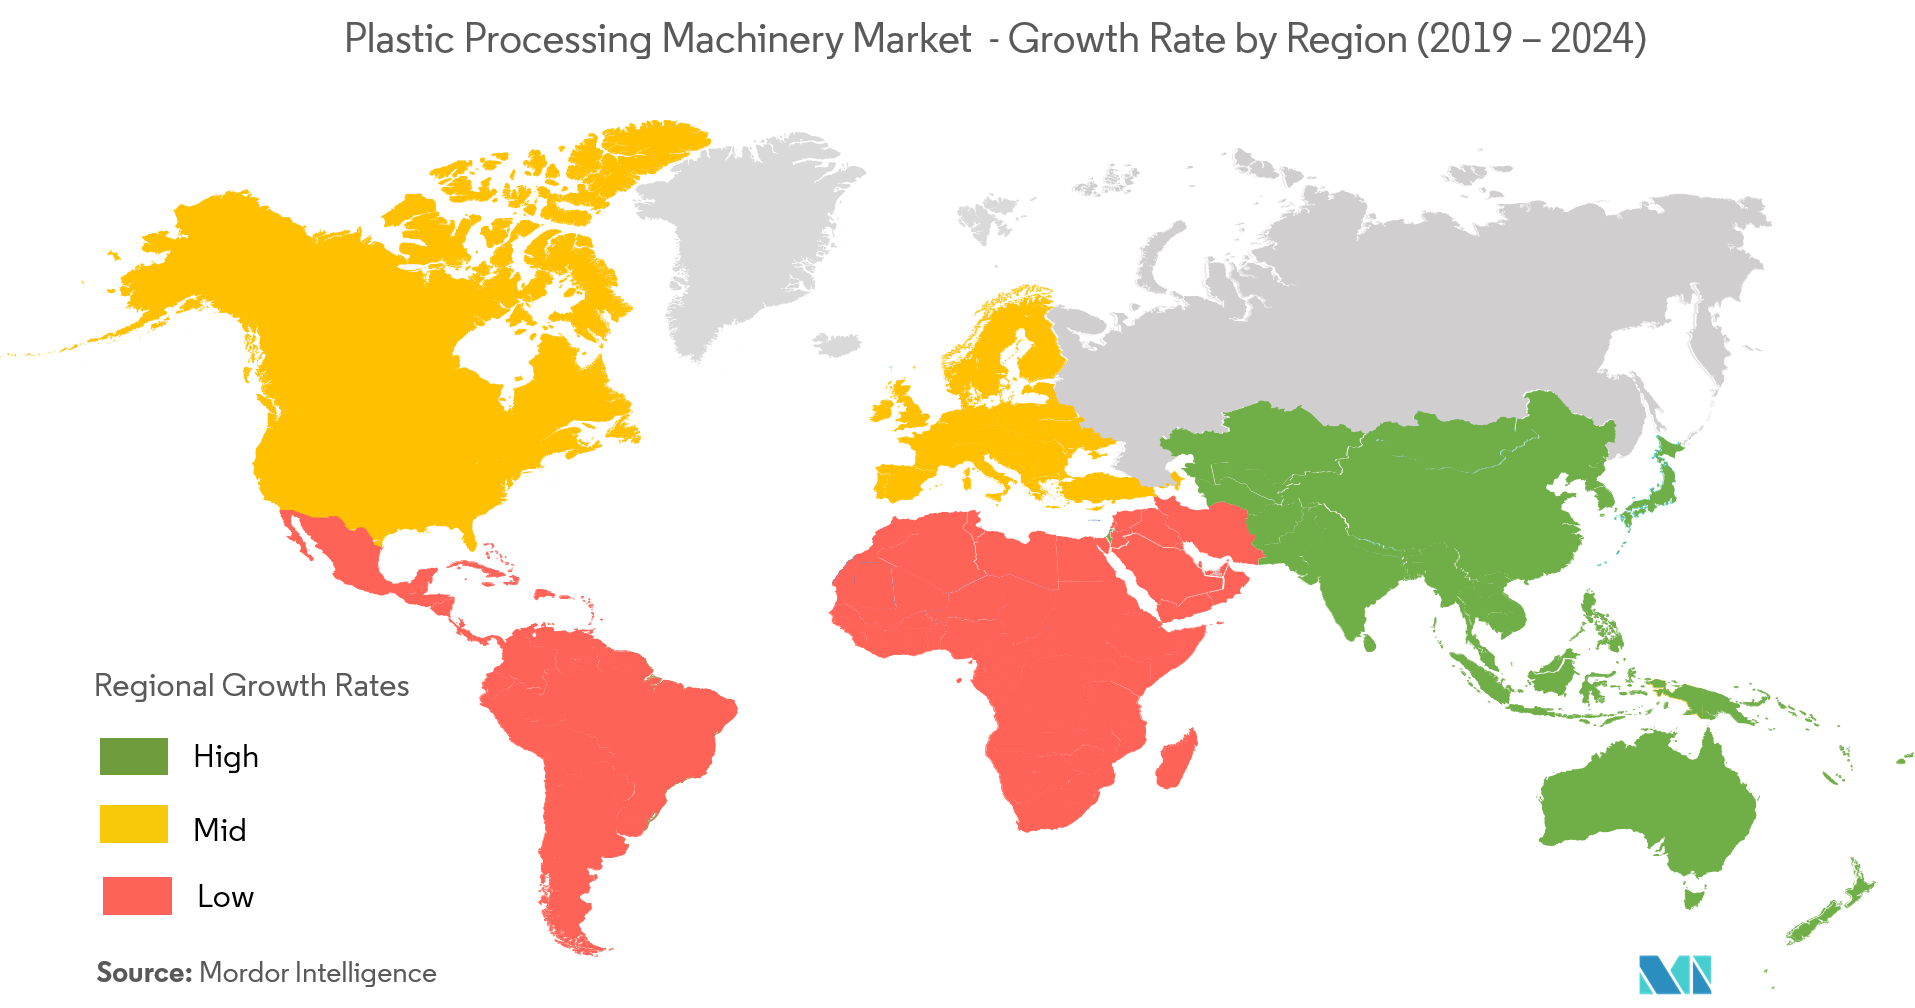 Plastic Processing Machinery Market Growth by Region